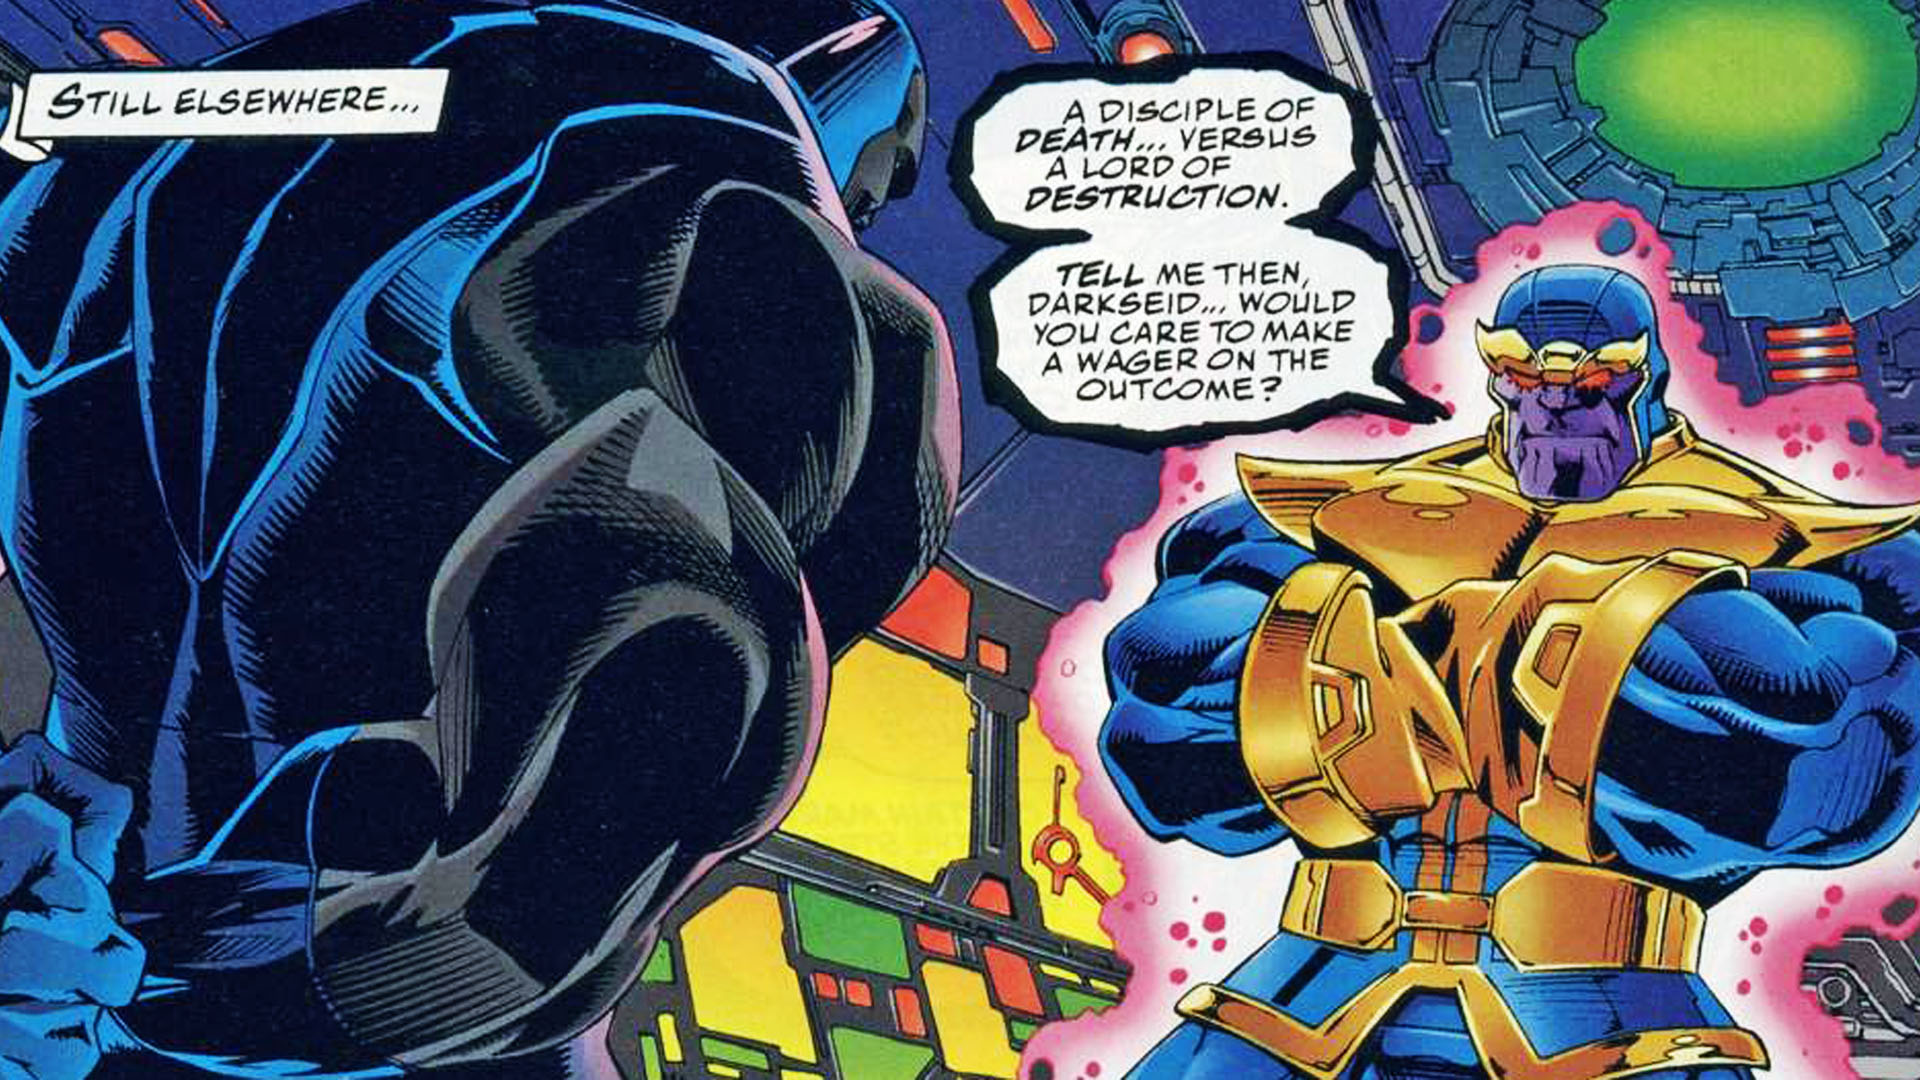 Thanos versus Darkseid – inside the epic Marvel vs DC matchup that actually happened